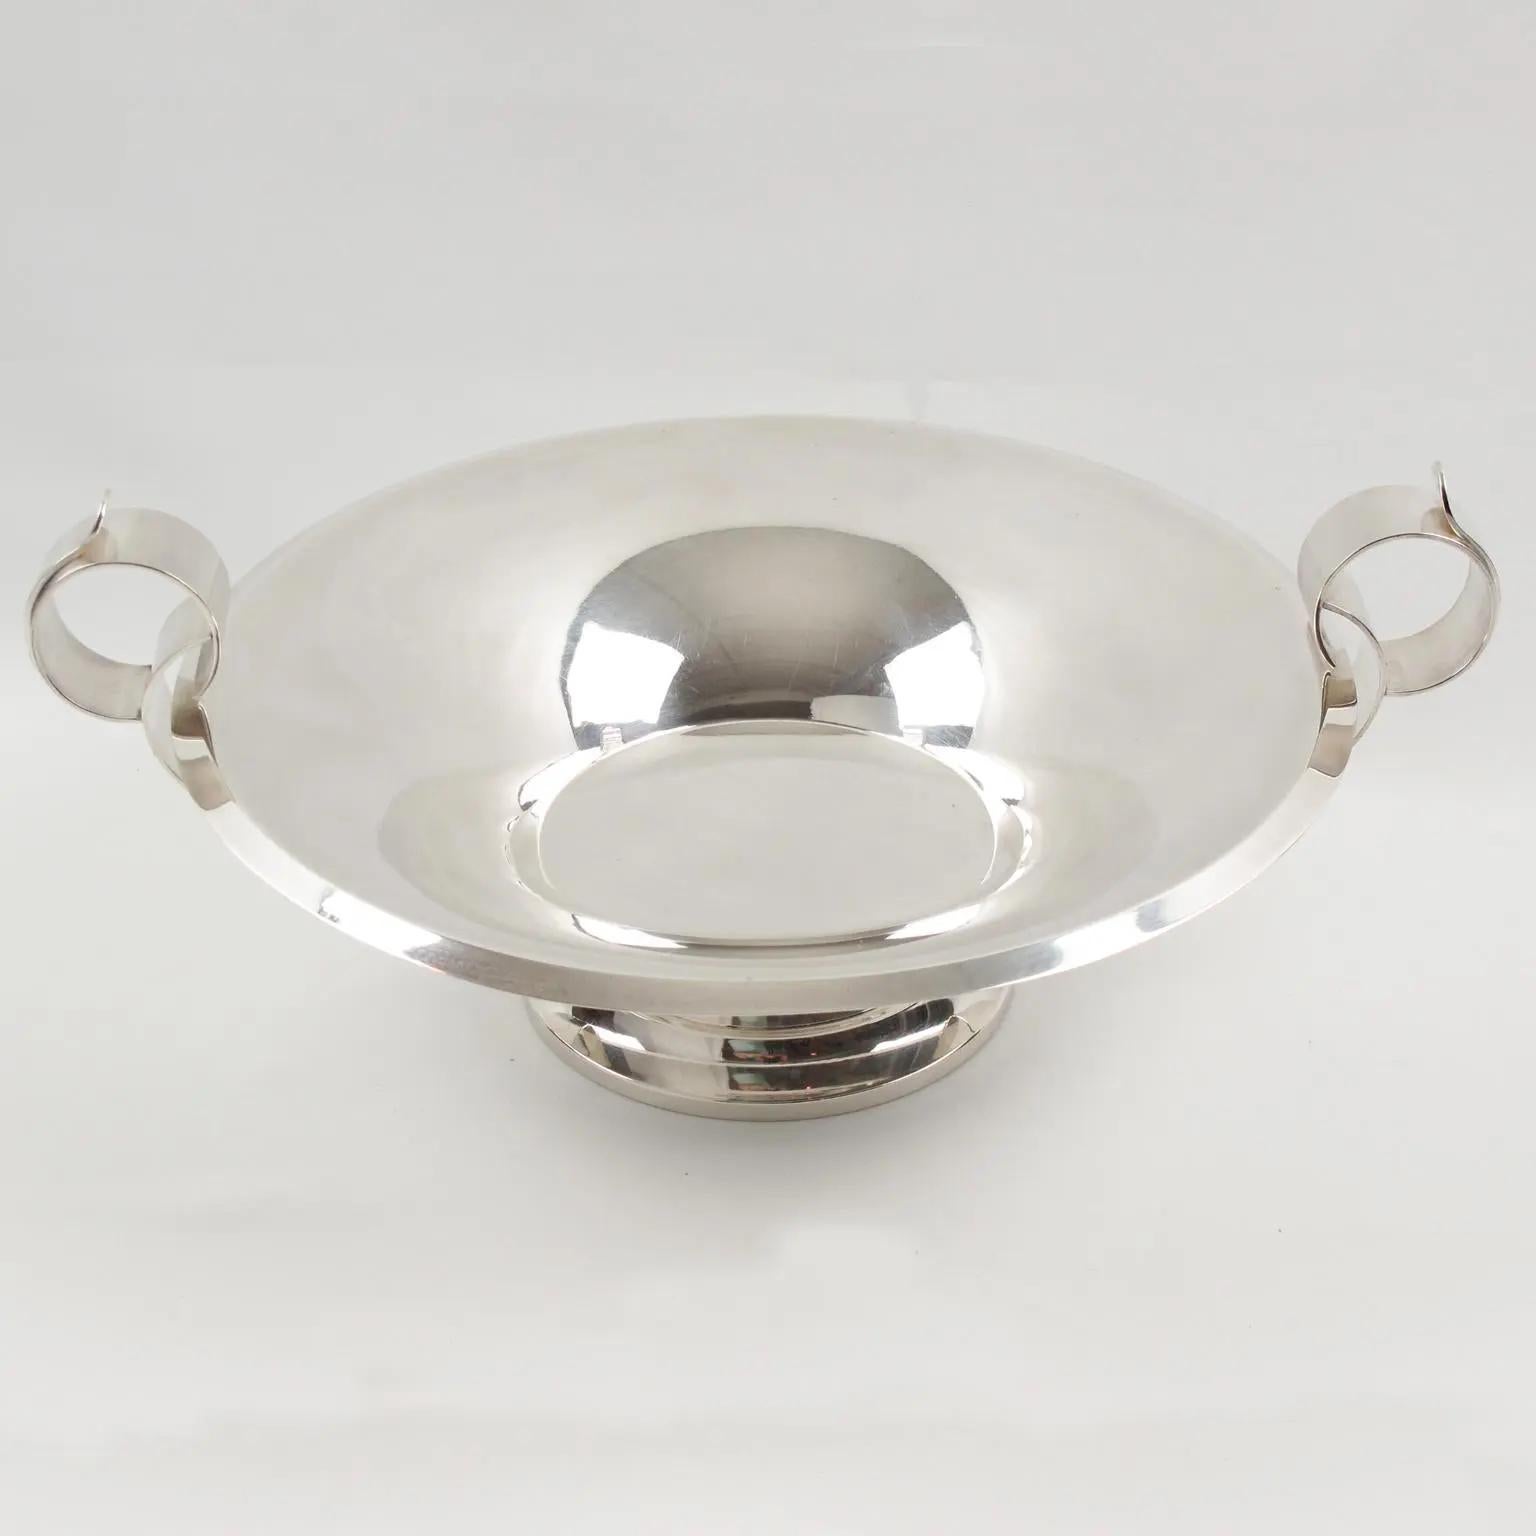 French Art Deco Silver Plate Decorative Bowl Centerpiece, France 1930s For Sale